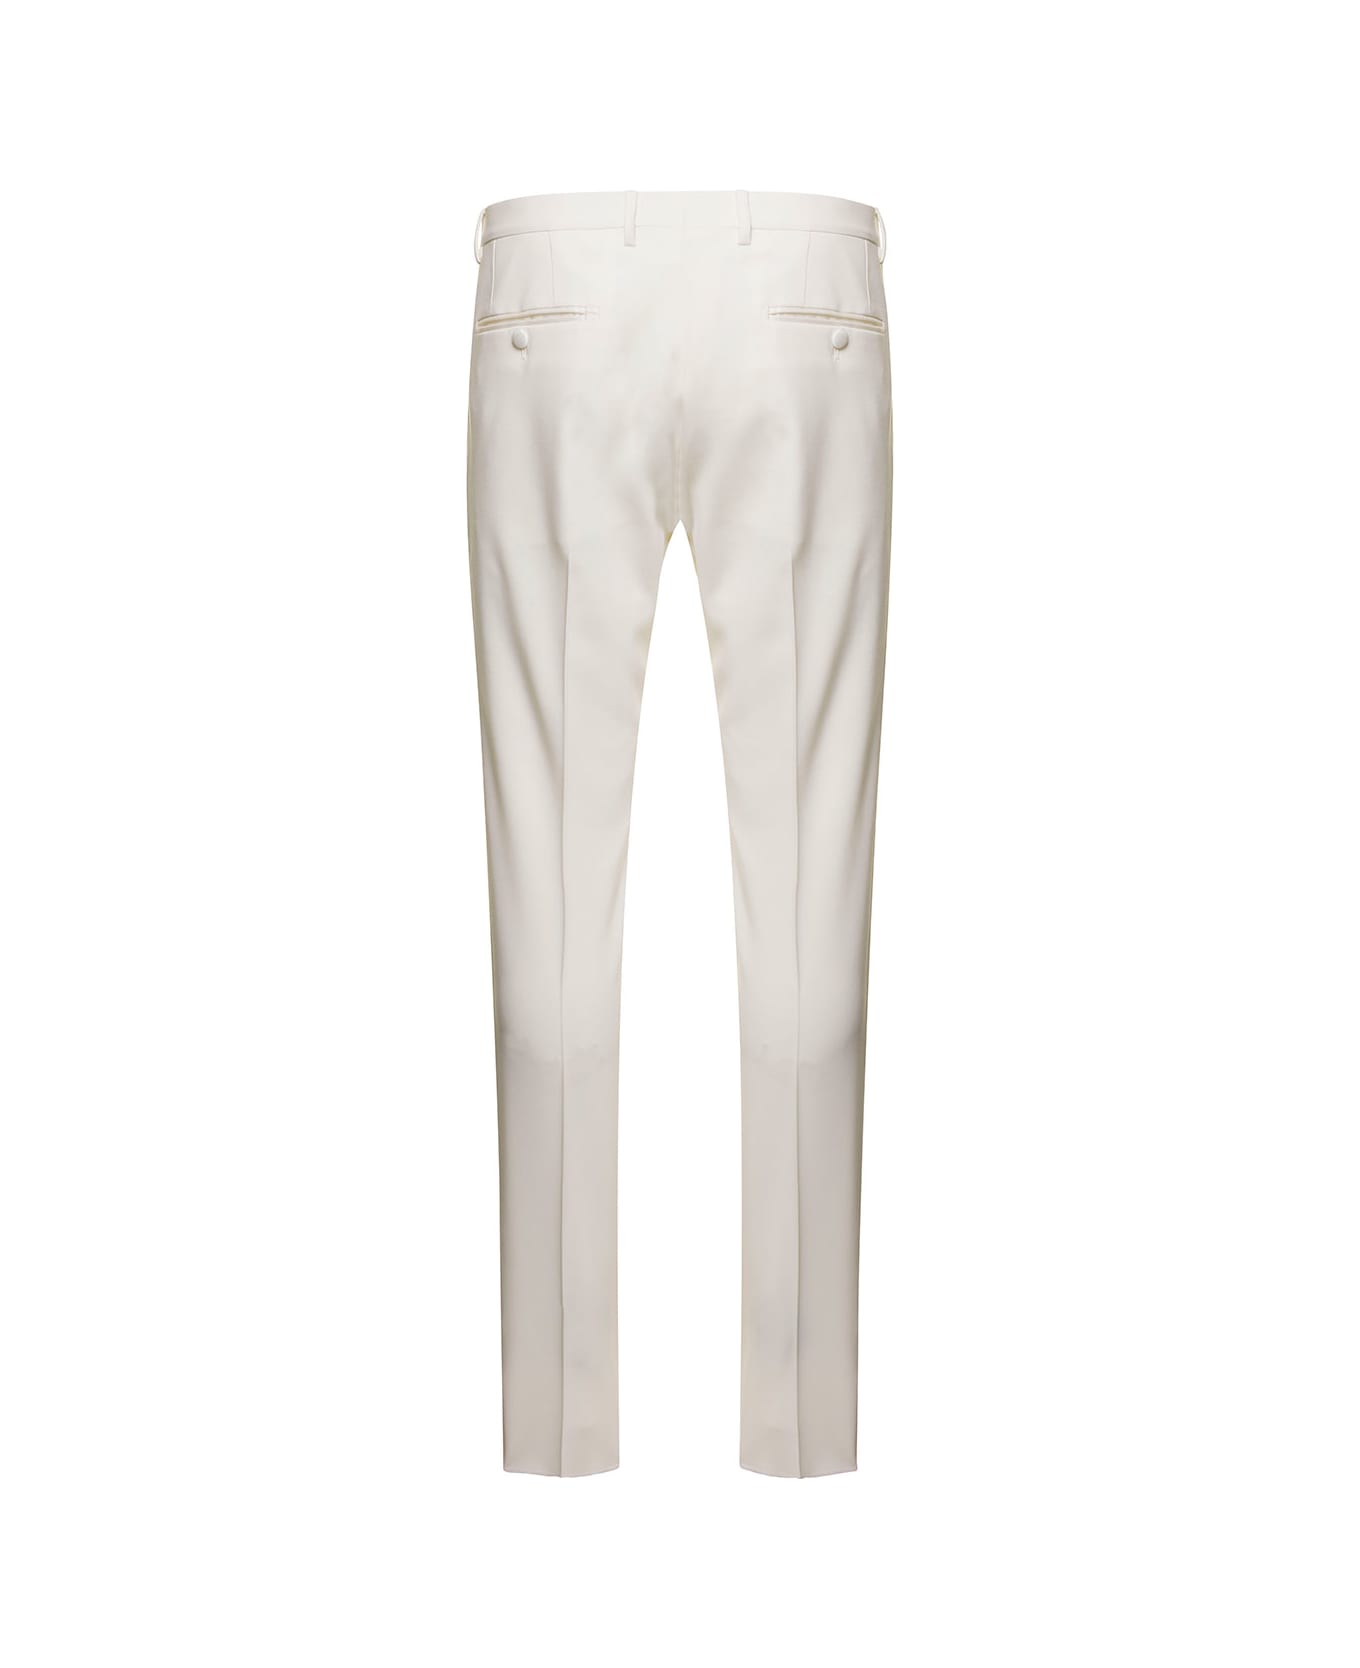 Dolce & Gabbana White Slim Pants With Valletta Button In Wool And Silk Blend Man - White